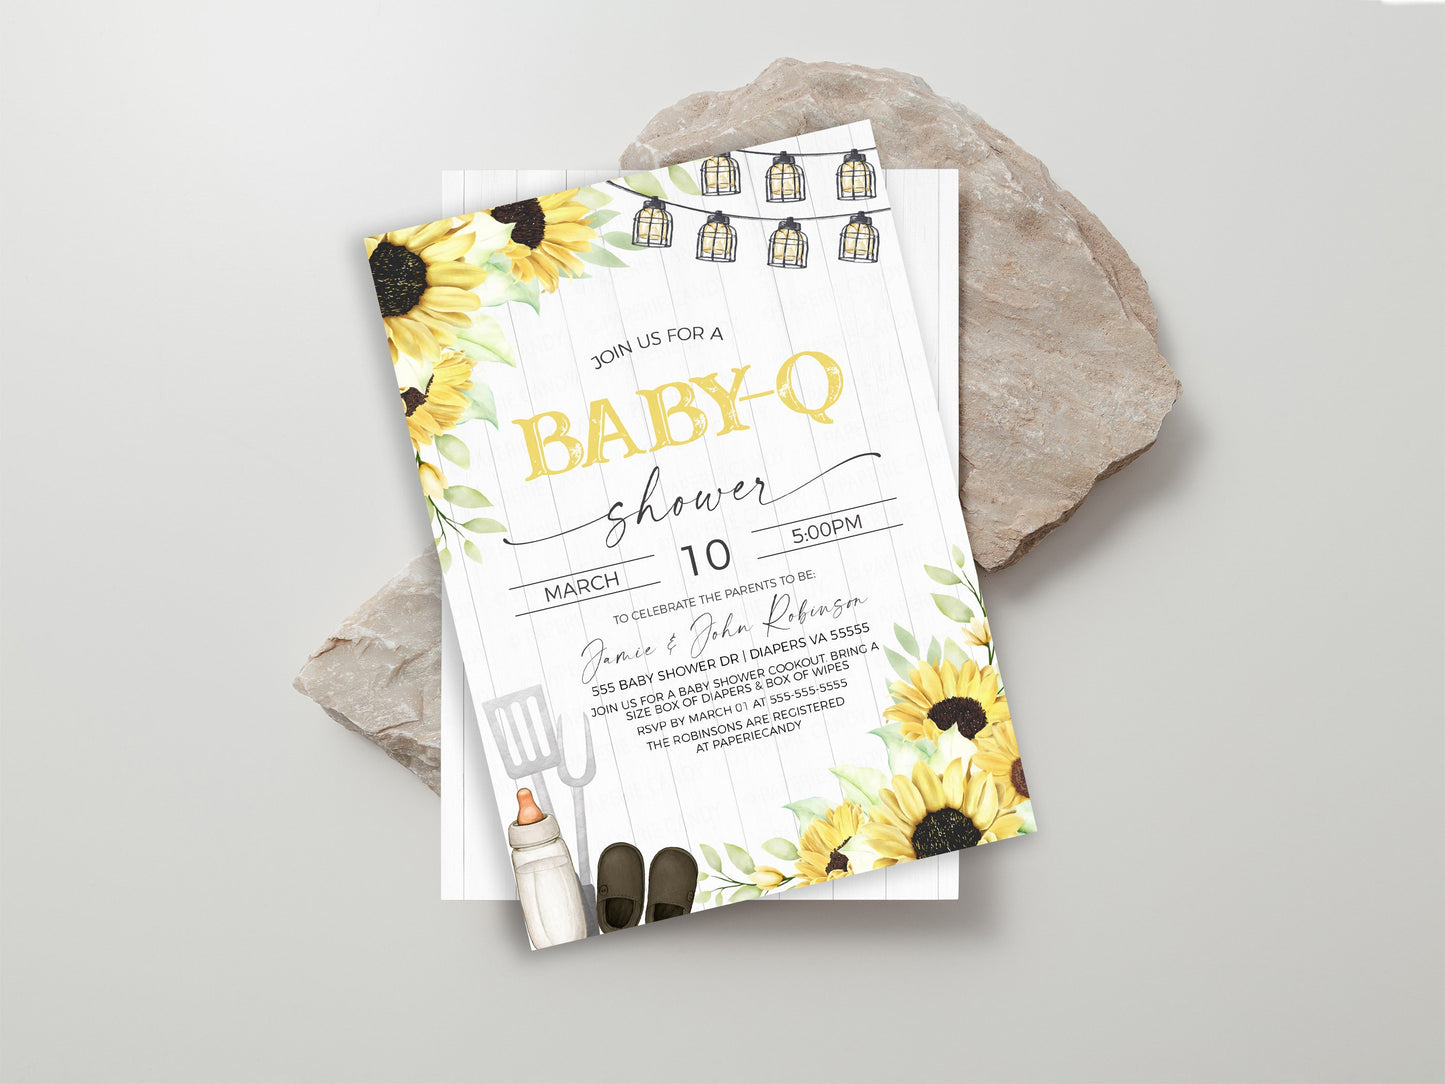 Baby-Q Baby Shower Invitation, Gender Neutral Sunflowers Baby-Q Invite, Coed Couples BBQ Burgers Beer, Backyard Barbecue, Editable Printable